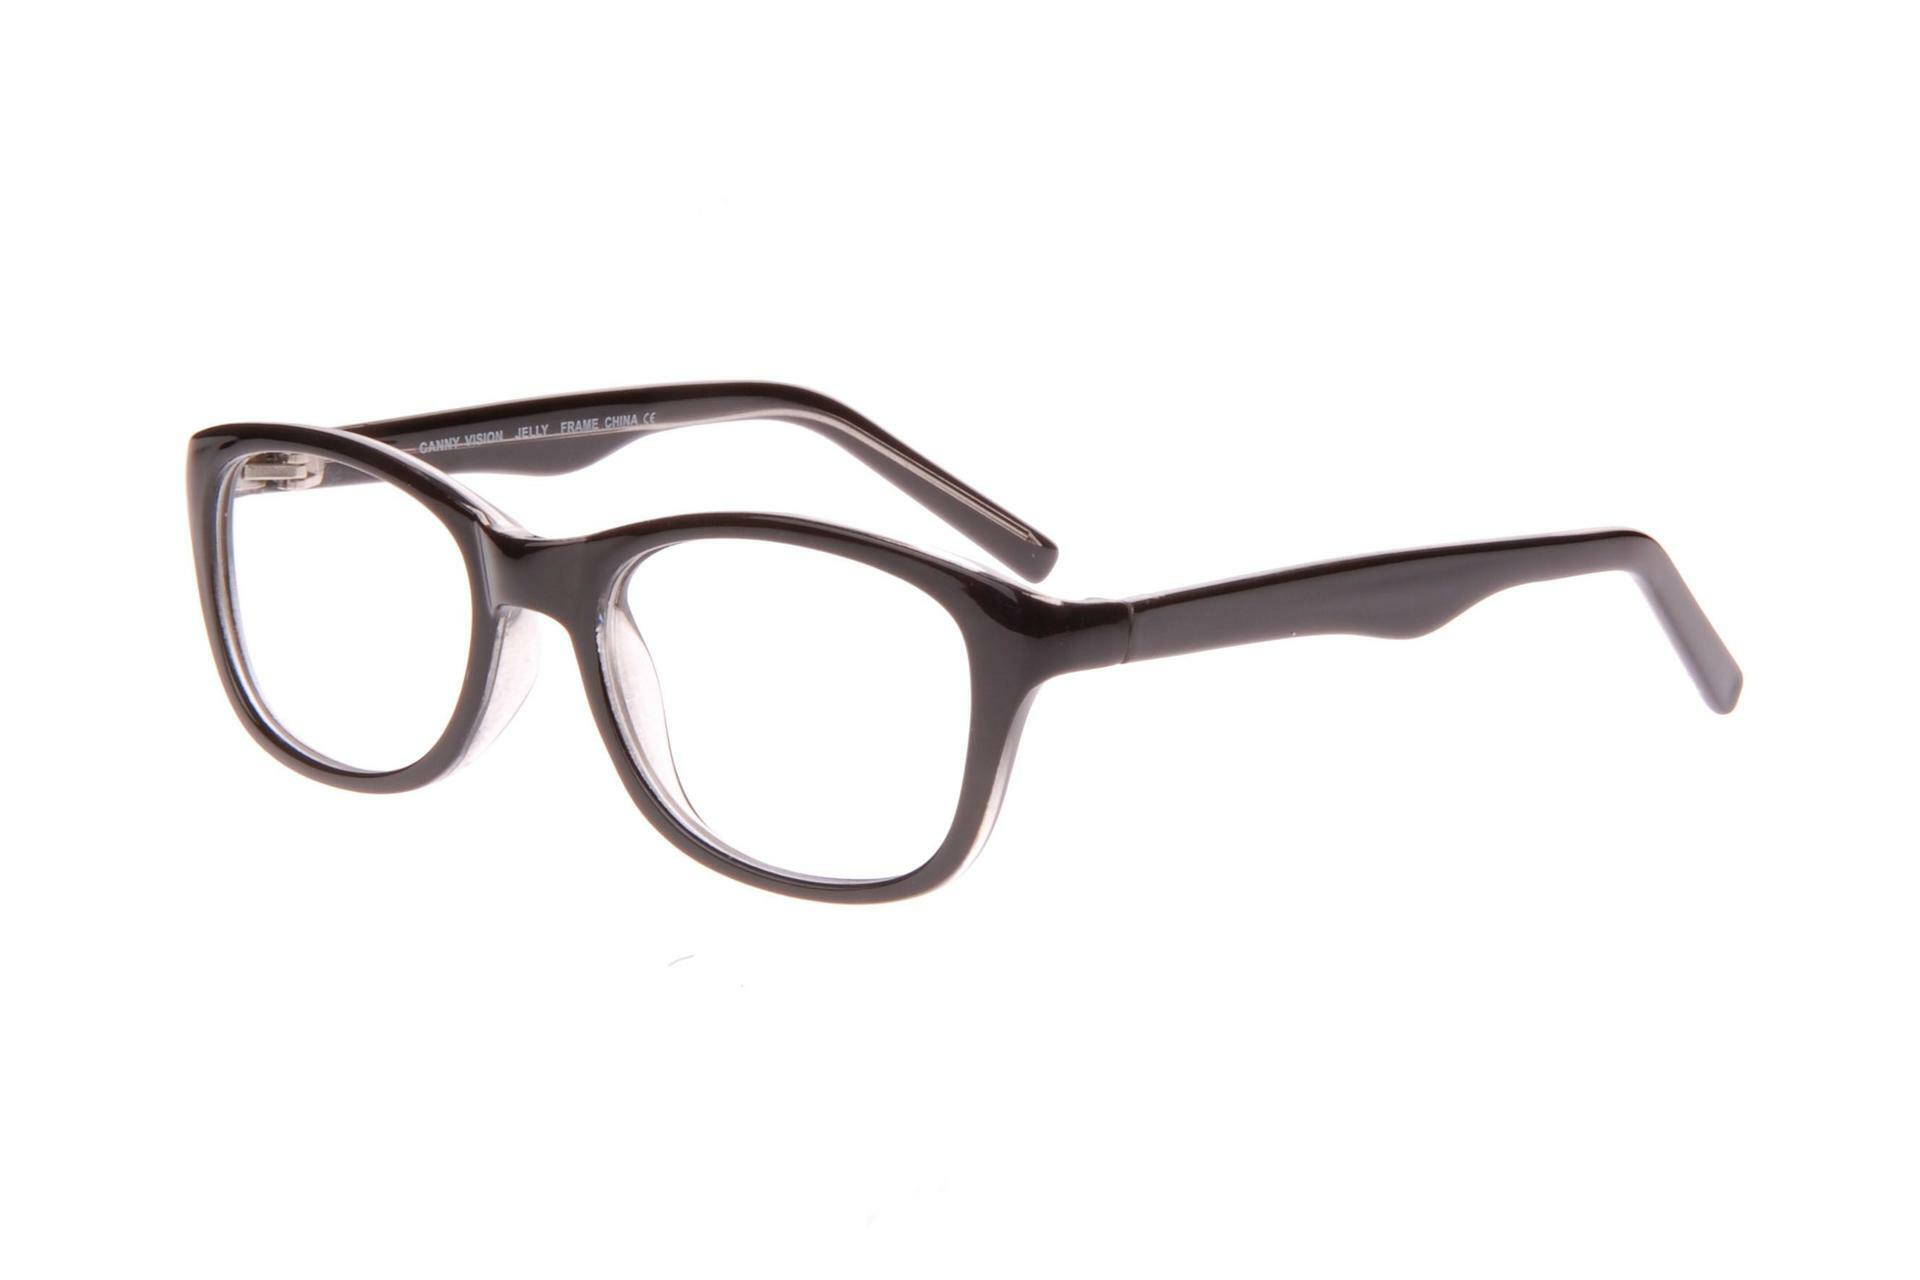 NEW CANNY VISION Black on Crystal JELLY Eyeglasses 45mm - True View Optics